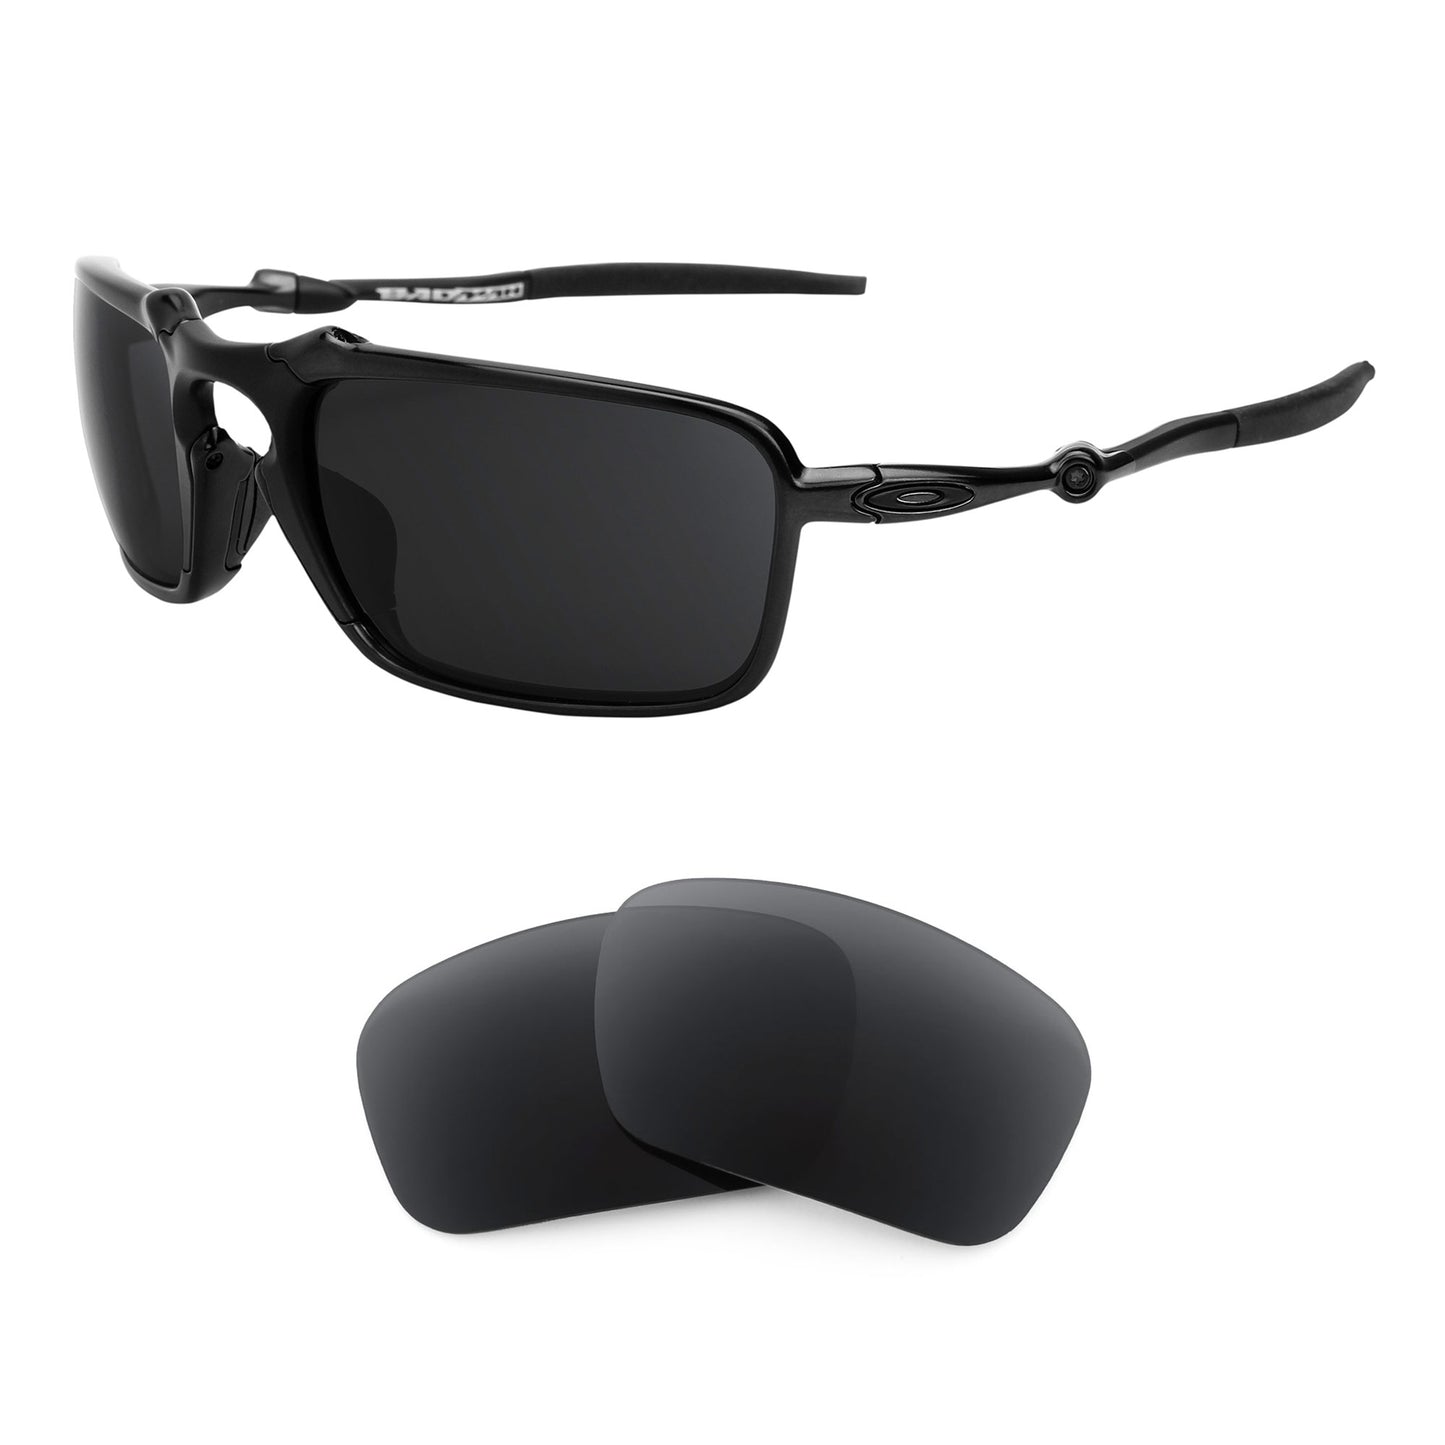 Oakley Badman sunglasses with replacement lenses